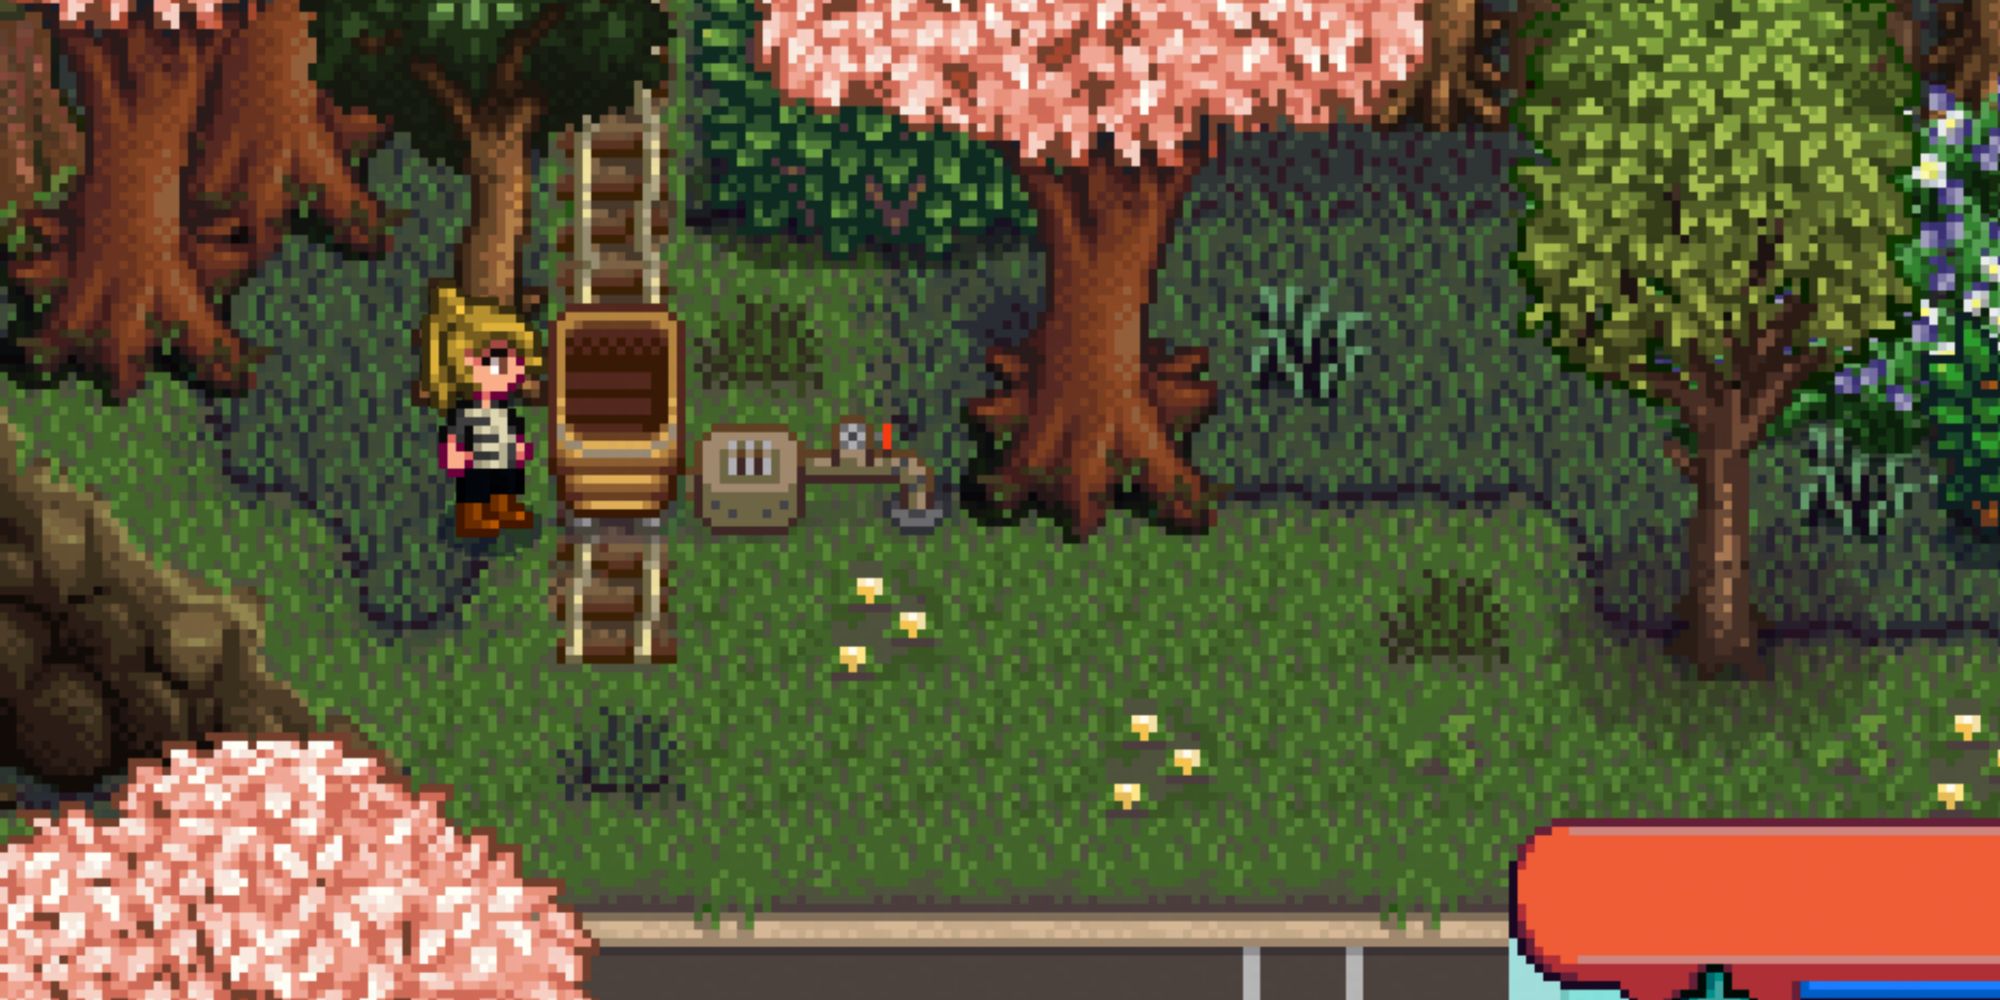 Minecart at the bus stop In Stardew Valley.